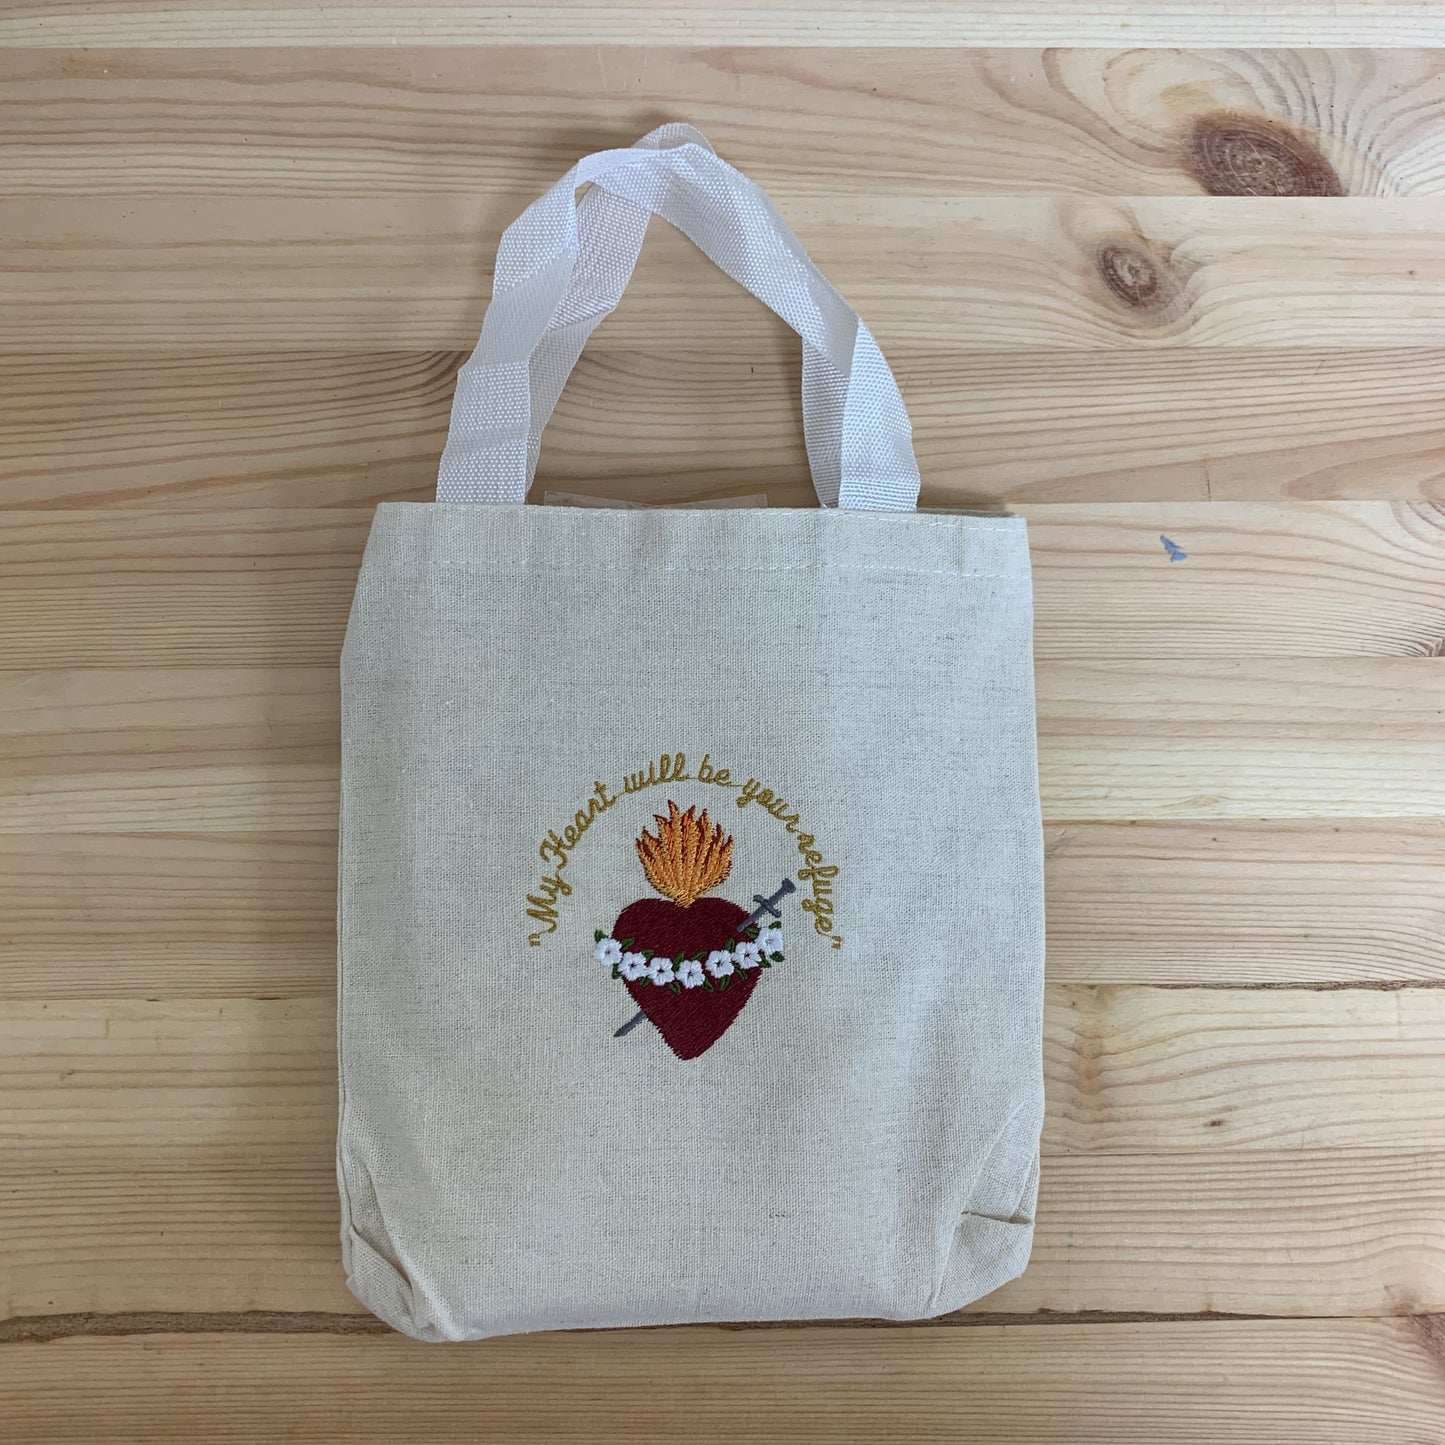 Embroidered Small Tote Bag by SCTJM